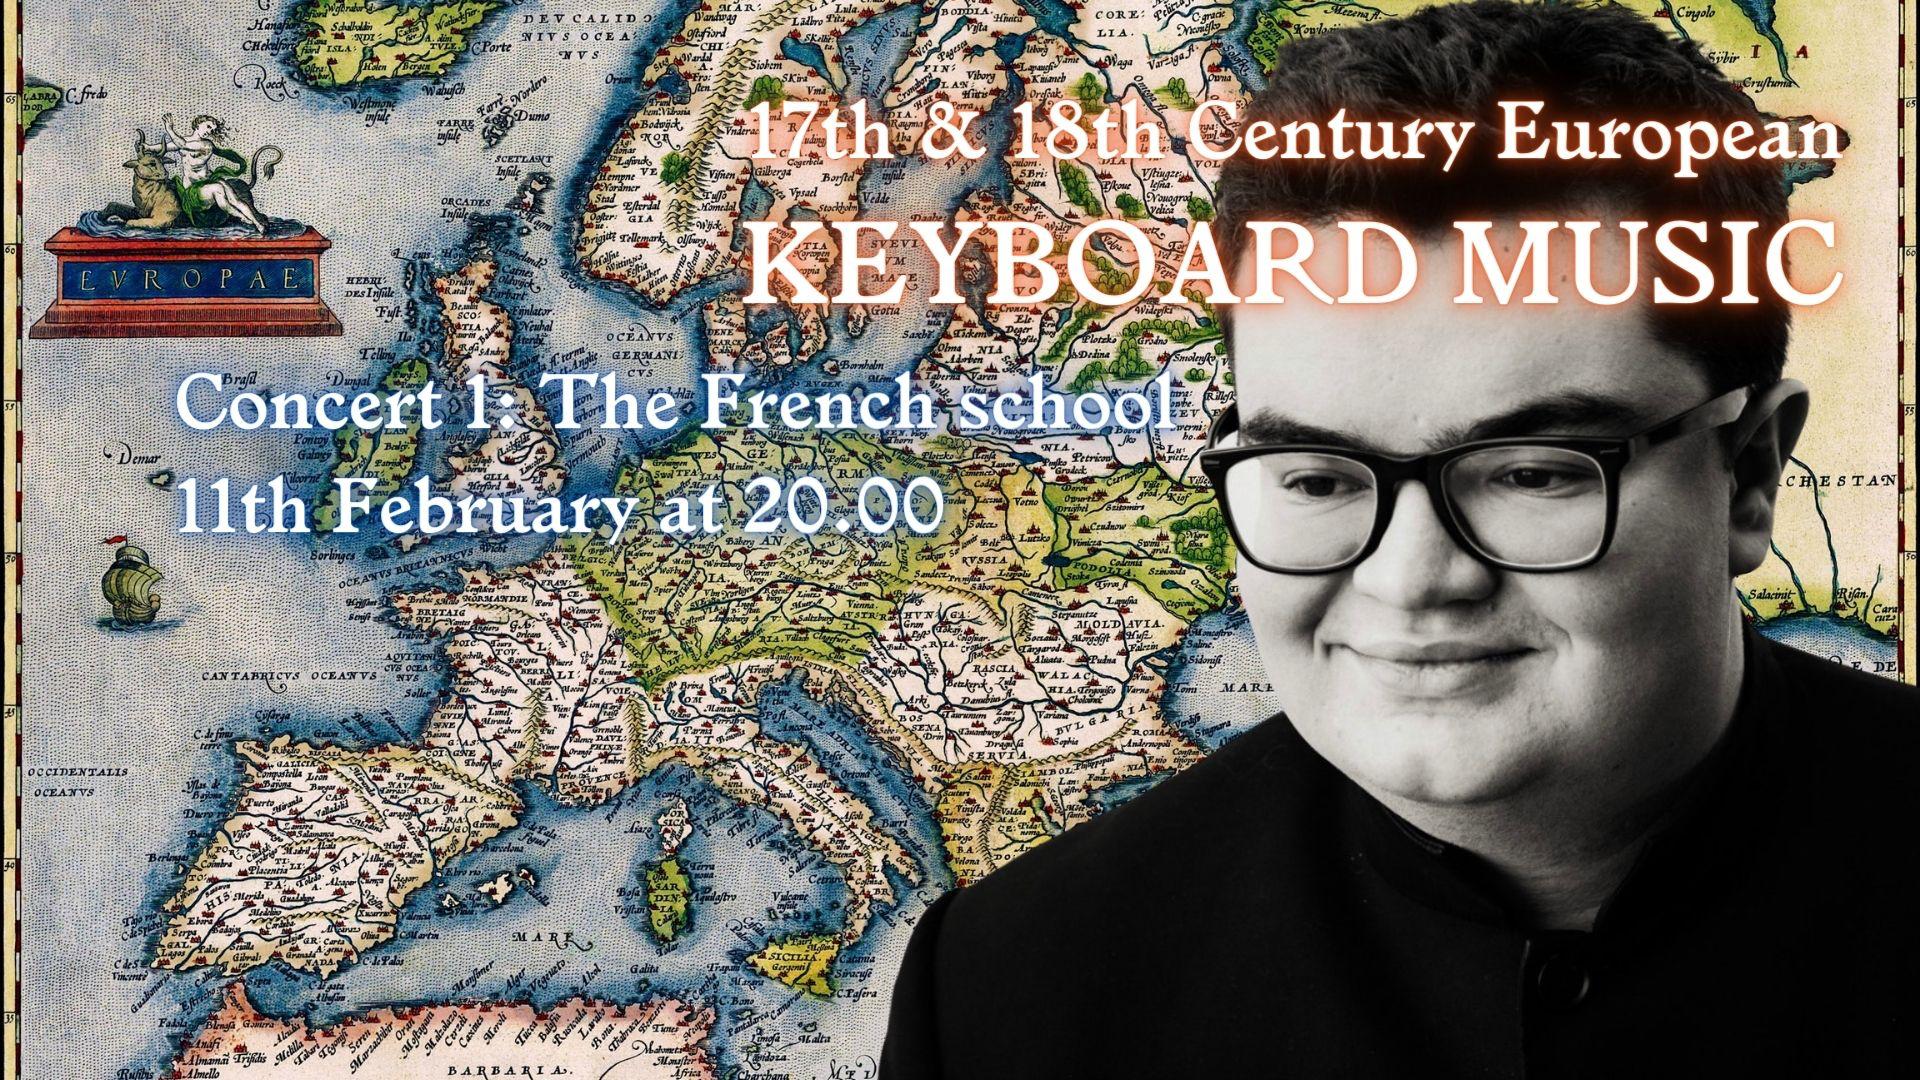 17th & 18th century European keyboard music: Concert No.1 ~ Live Broadcast